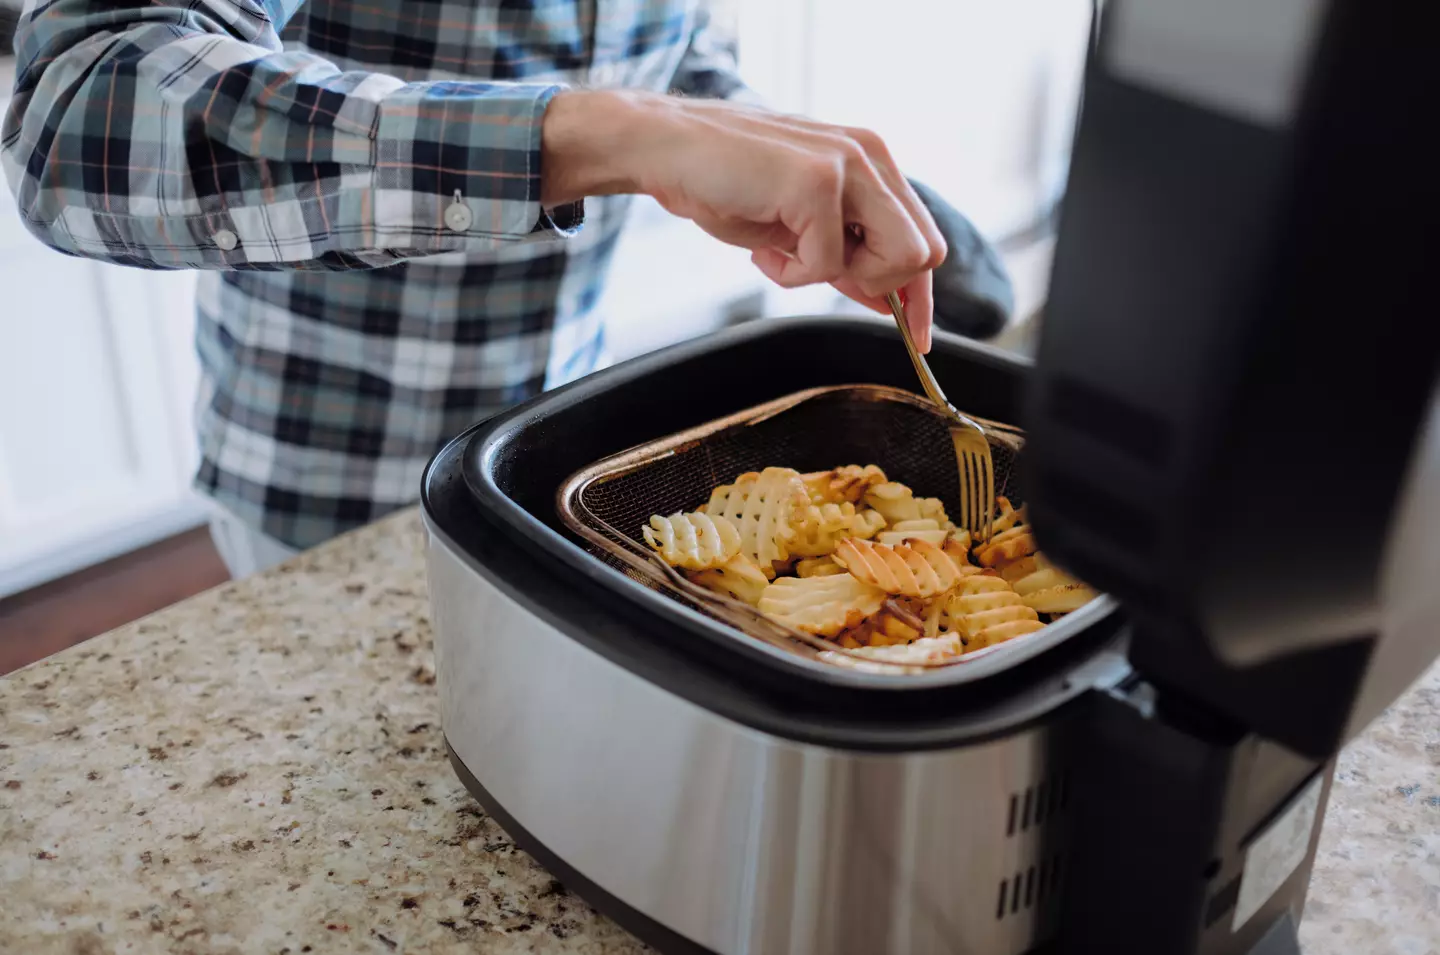 How often should you clean your air fryer?